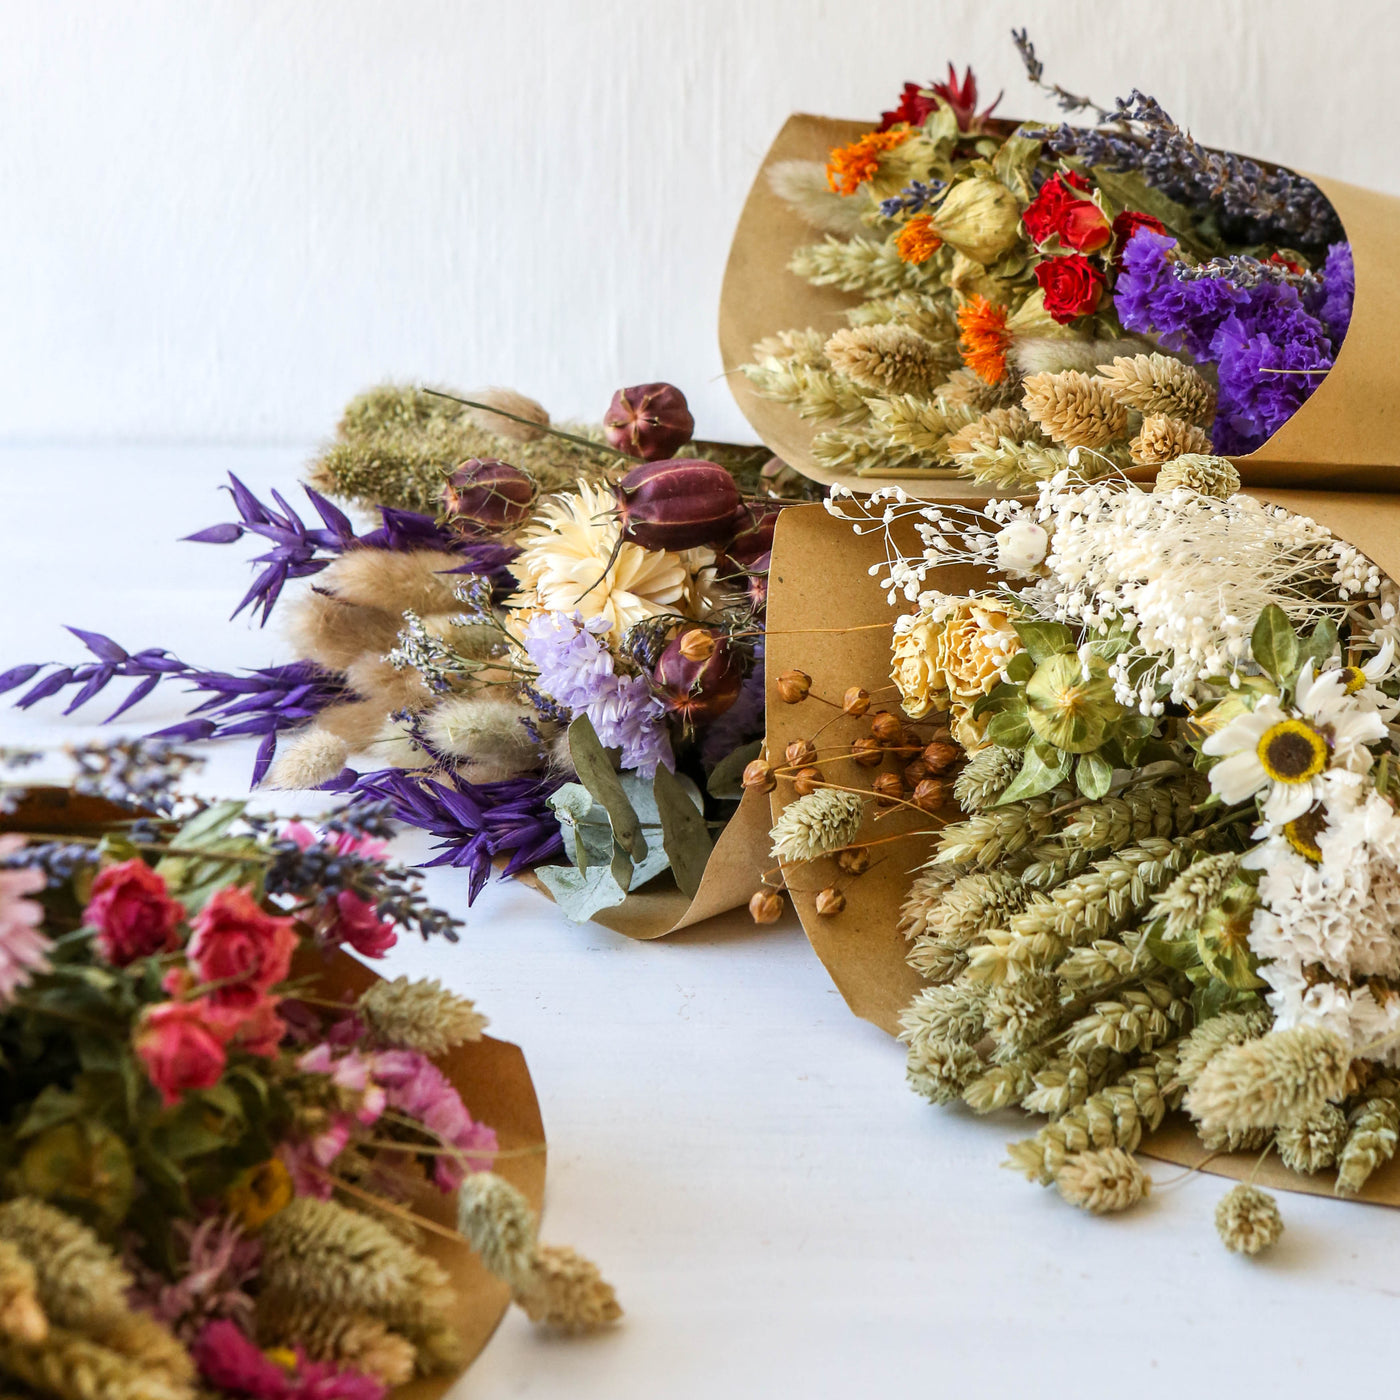 Small Dried Flower Bouquet - Peaches